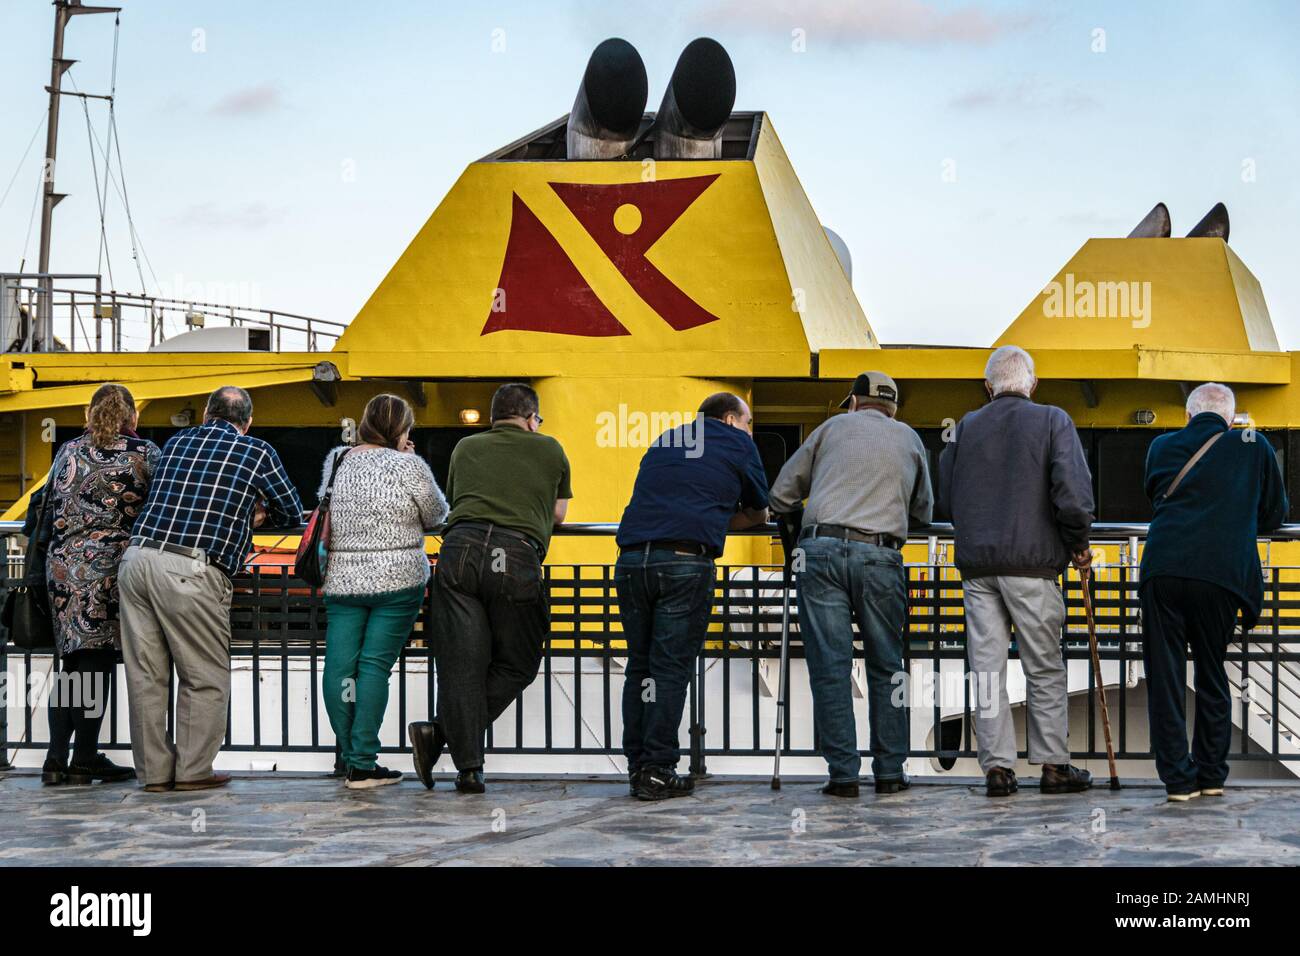 Locals watching the arrival of a Fred Olsen ferry in the Santa Cruz de Tenerife port. Stock Photo